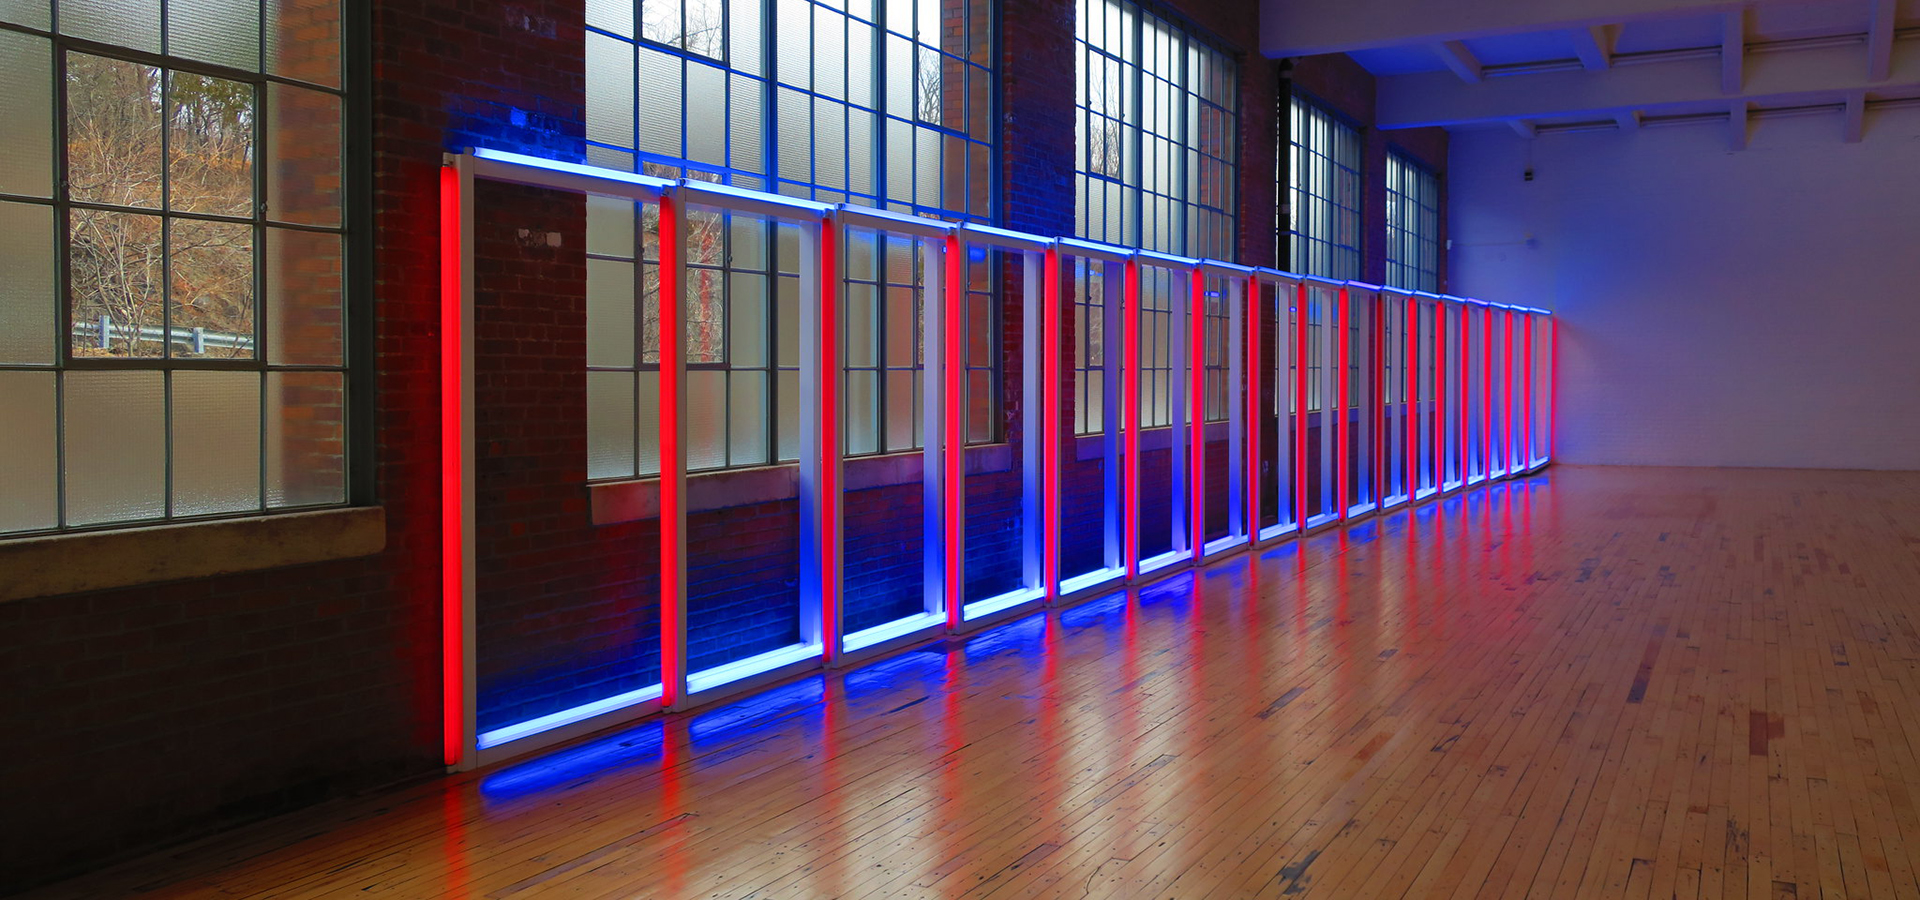 Photo of a neon artwork constructed out of rectangles that are red on the vertical and blue on the top, and standing on their own down a wooden floor.